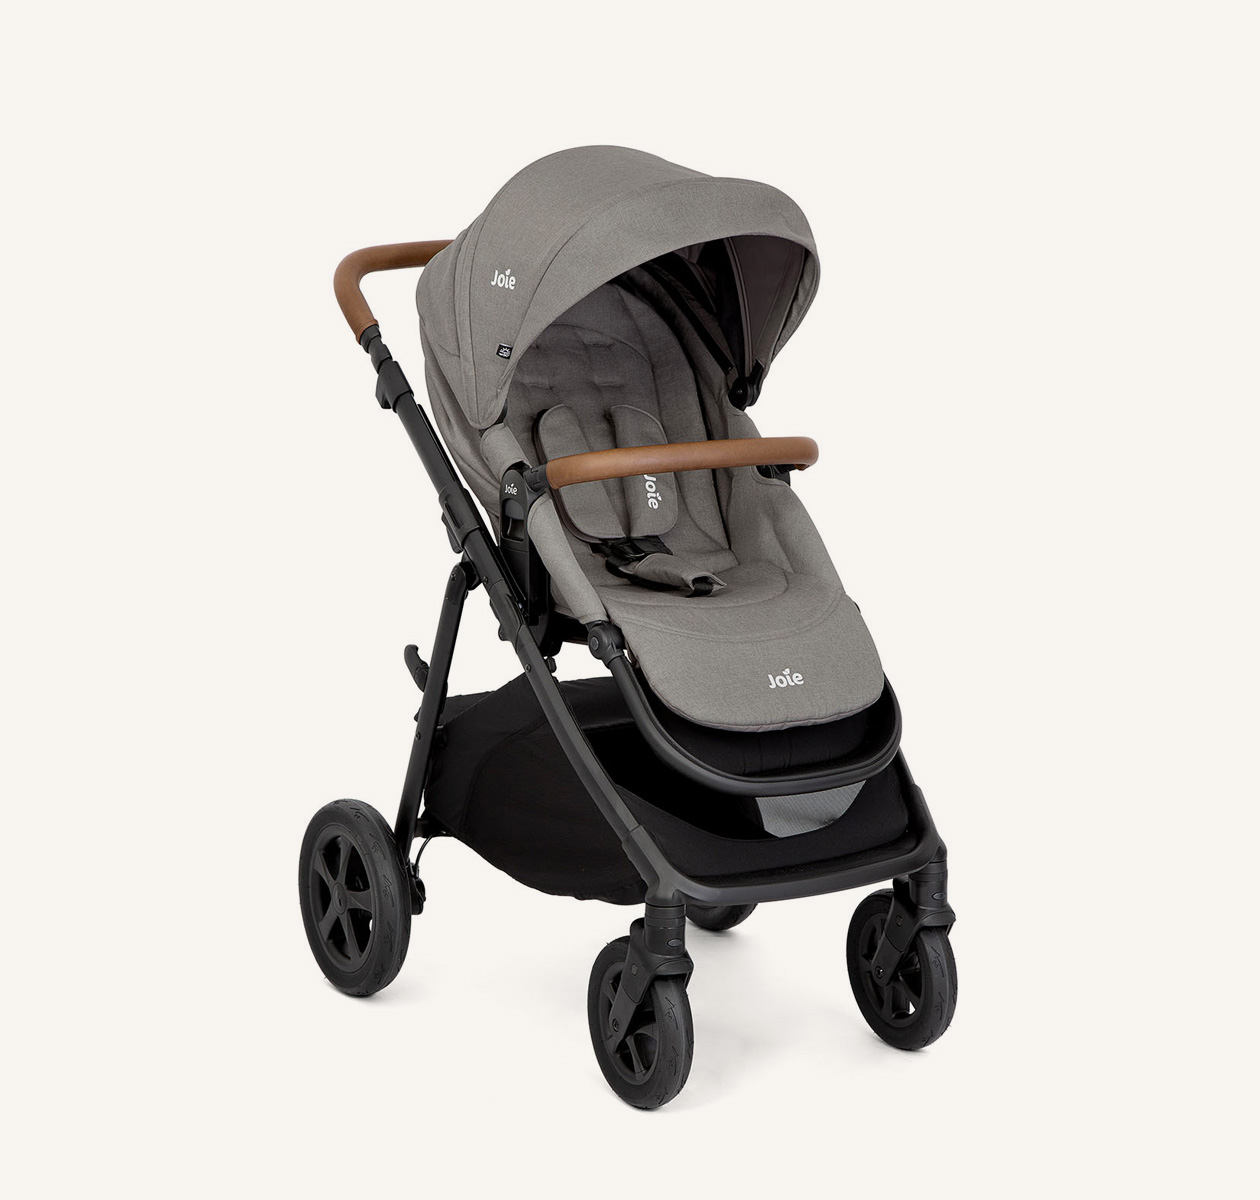 Joie alore stroller in gray at an angle. 